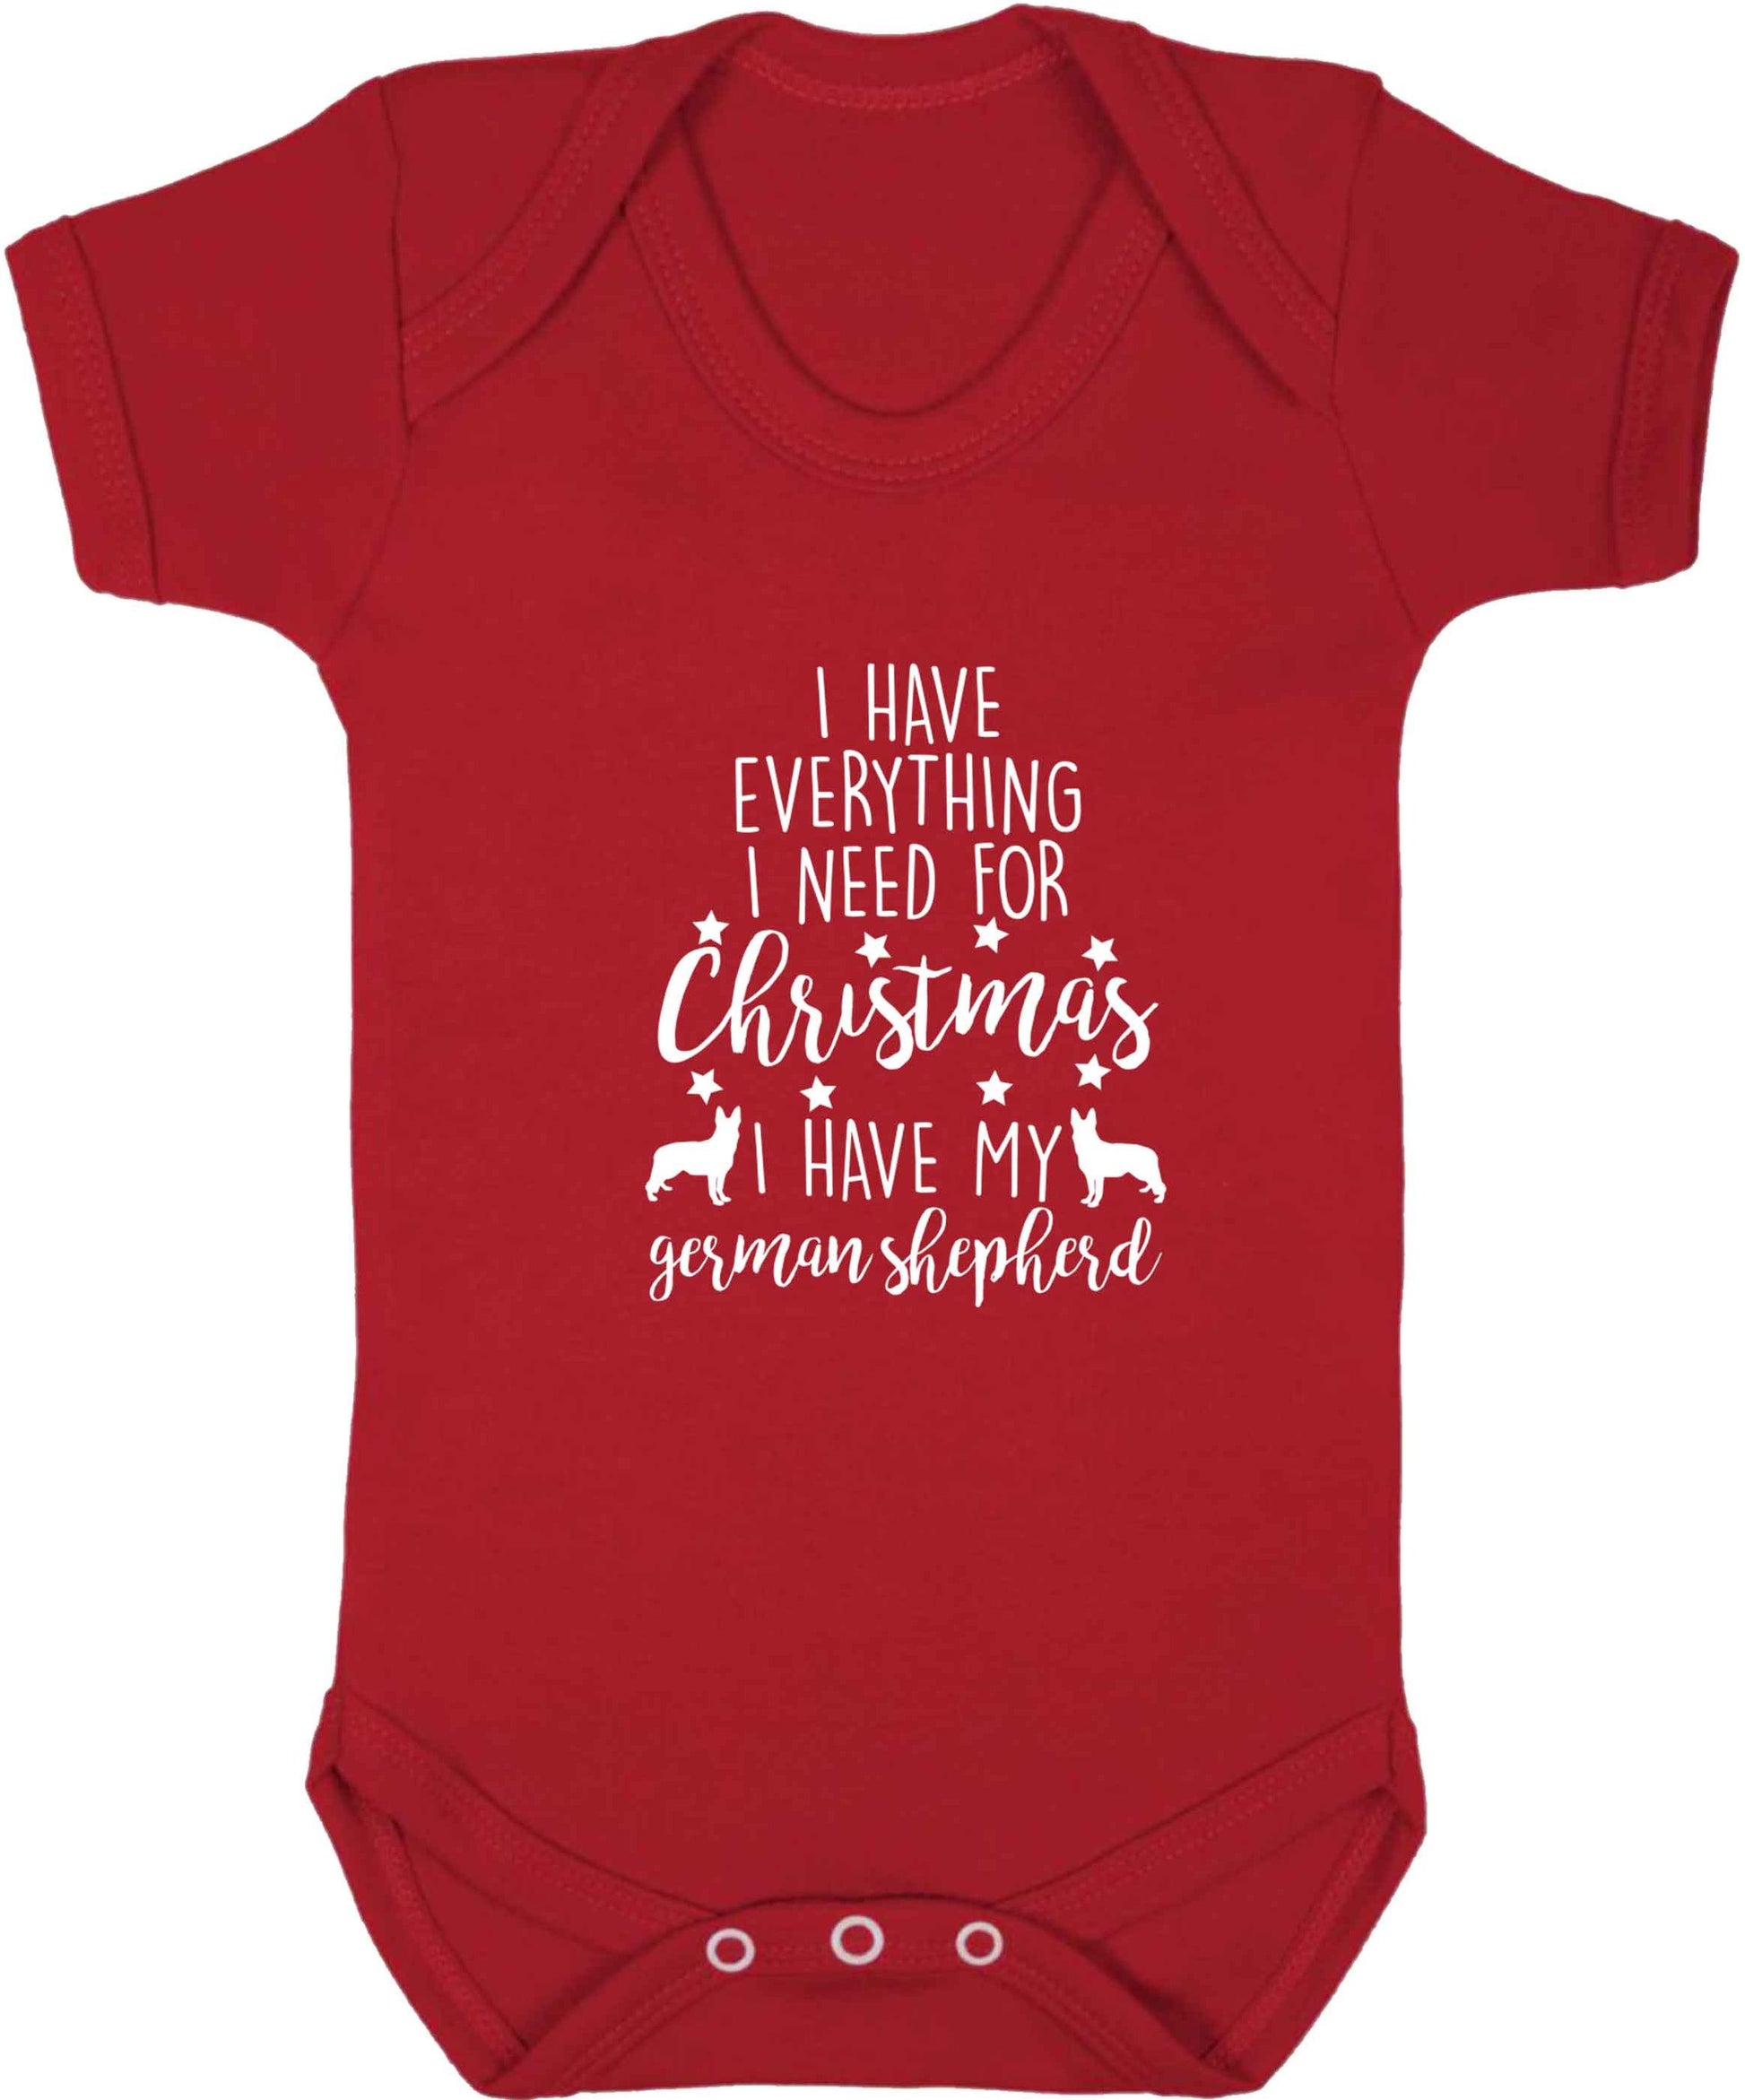 I have everything I need for Christmas I have my german shepherd baby vest red 18-24 months